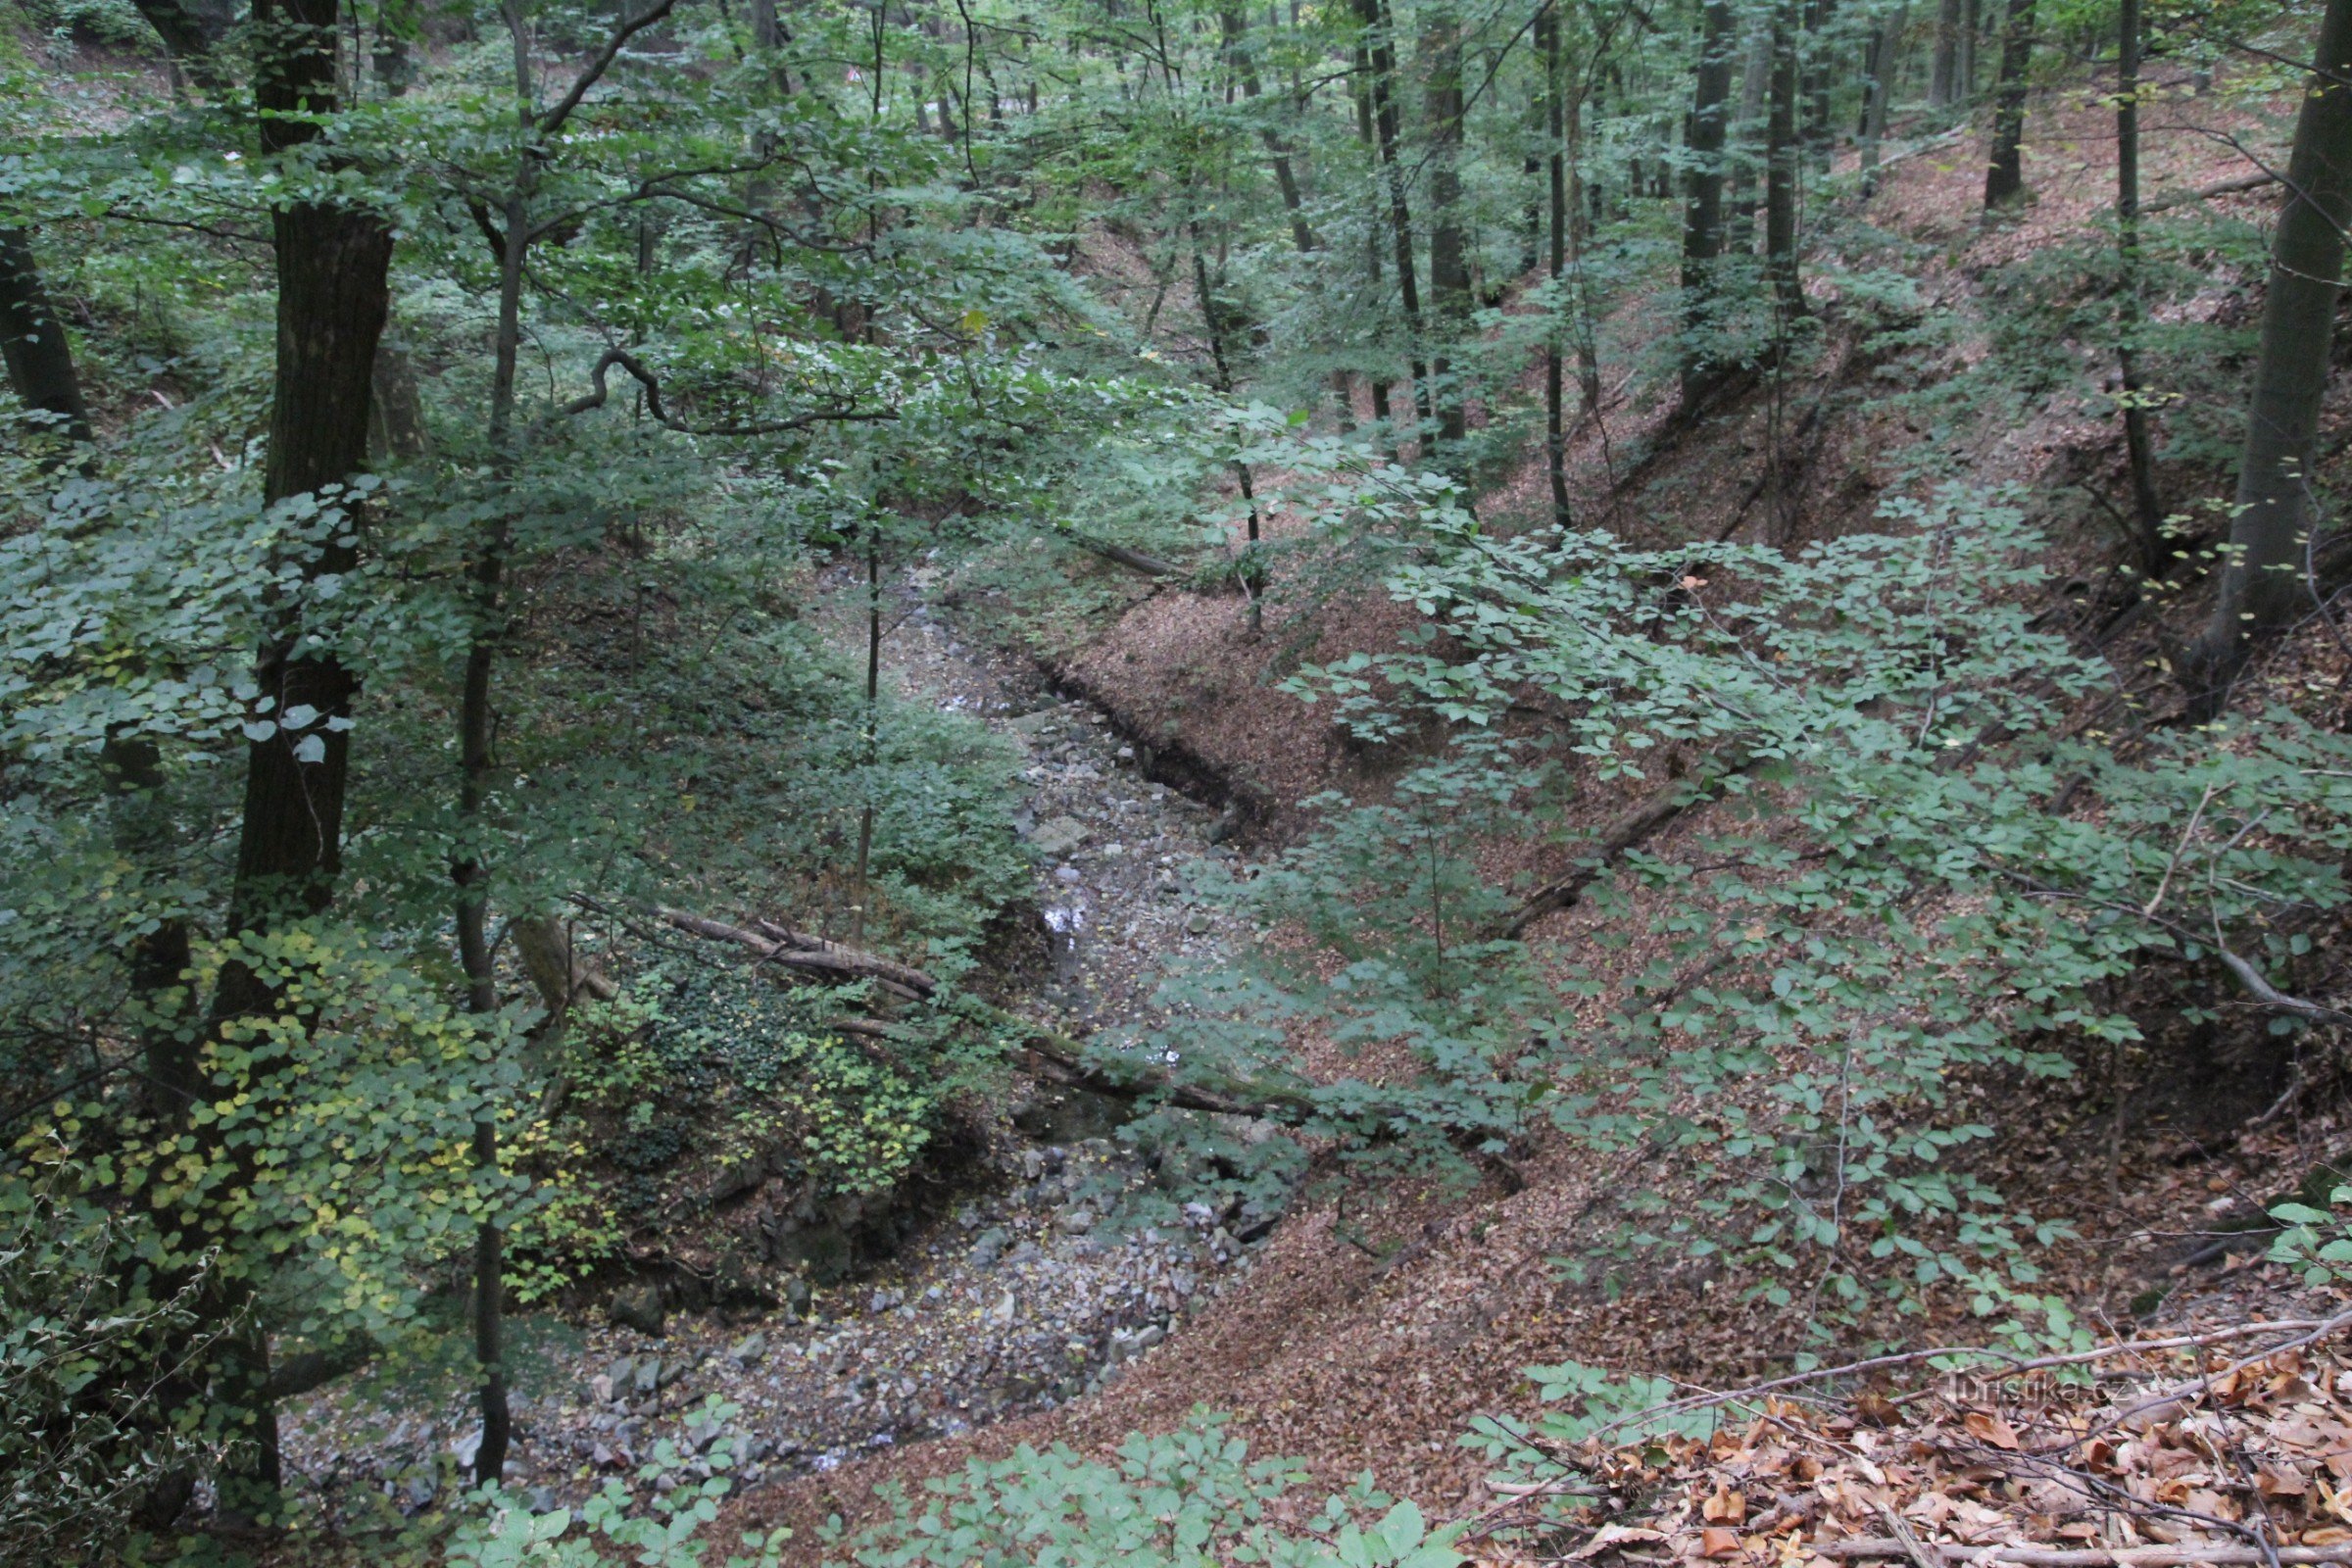 Kohoutovické stream valley - a natural monument